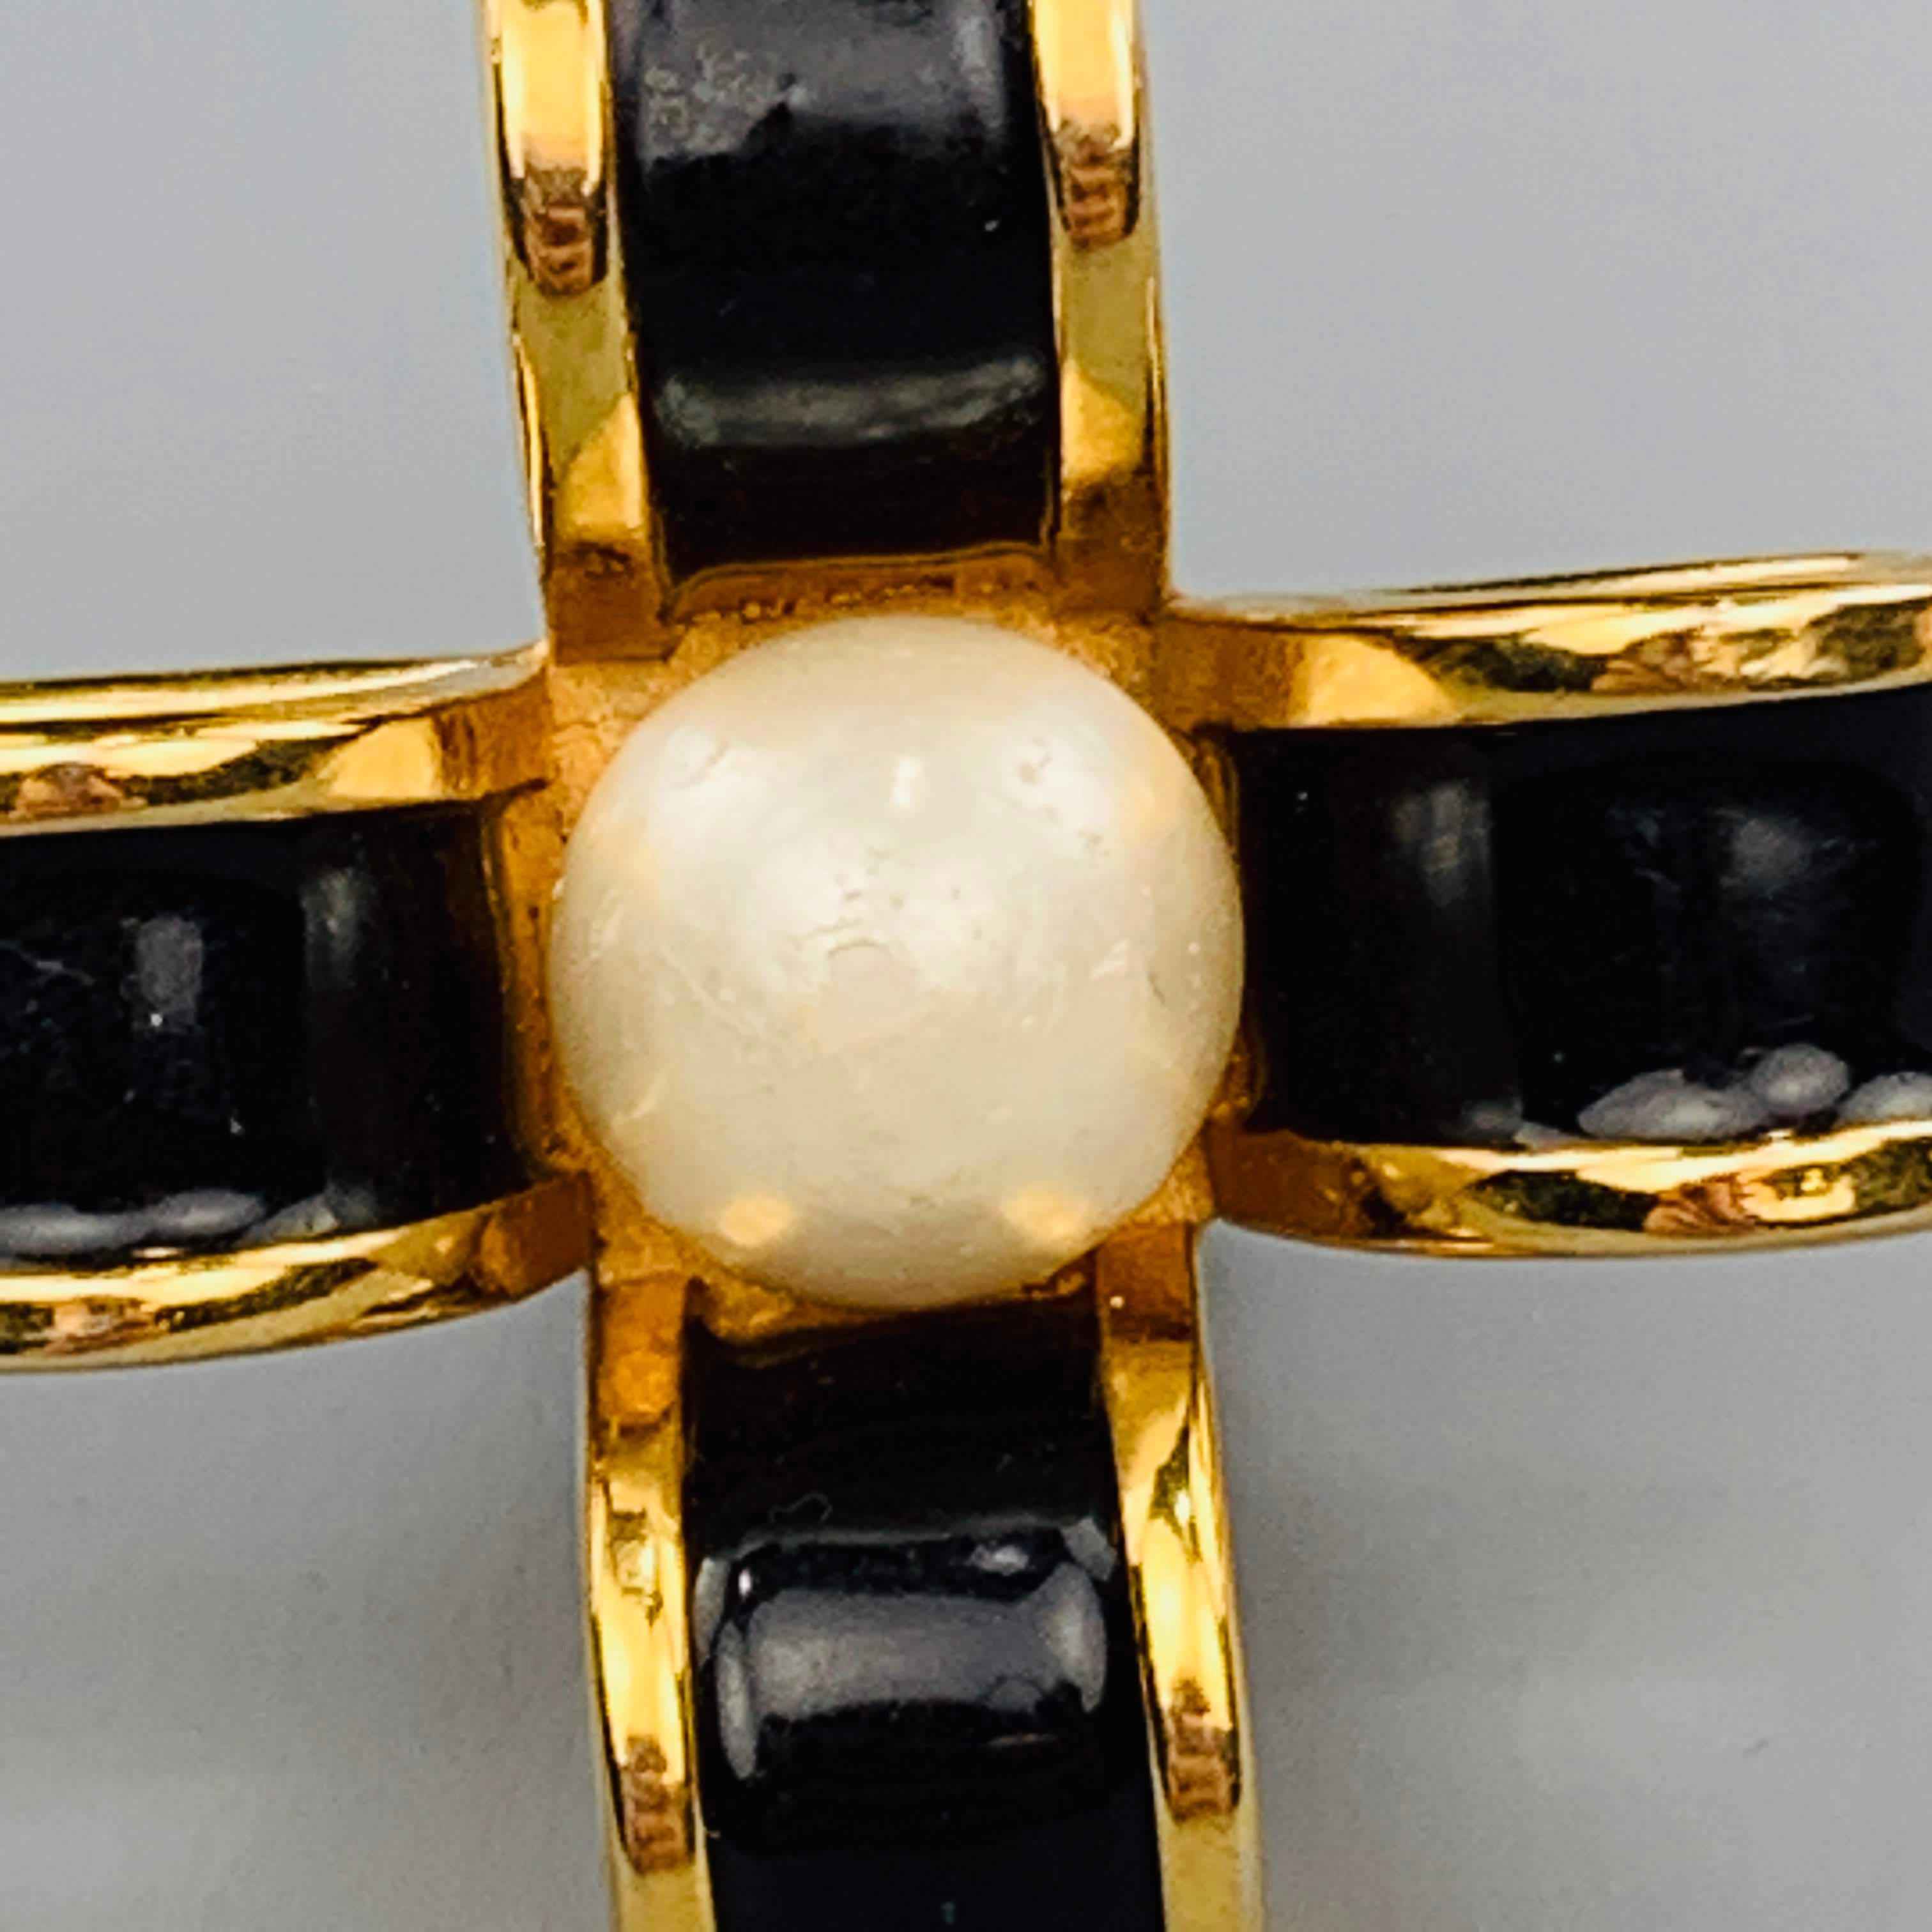 Vintage CHANEL (circa 1954-1971) clip on earrings come in yellow gold tone metal with black enamel in a bow cross motif with a faux pearl center. Wear with age.
 
Good Pre-Owned Condition.
 
4 x 4 cm.